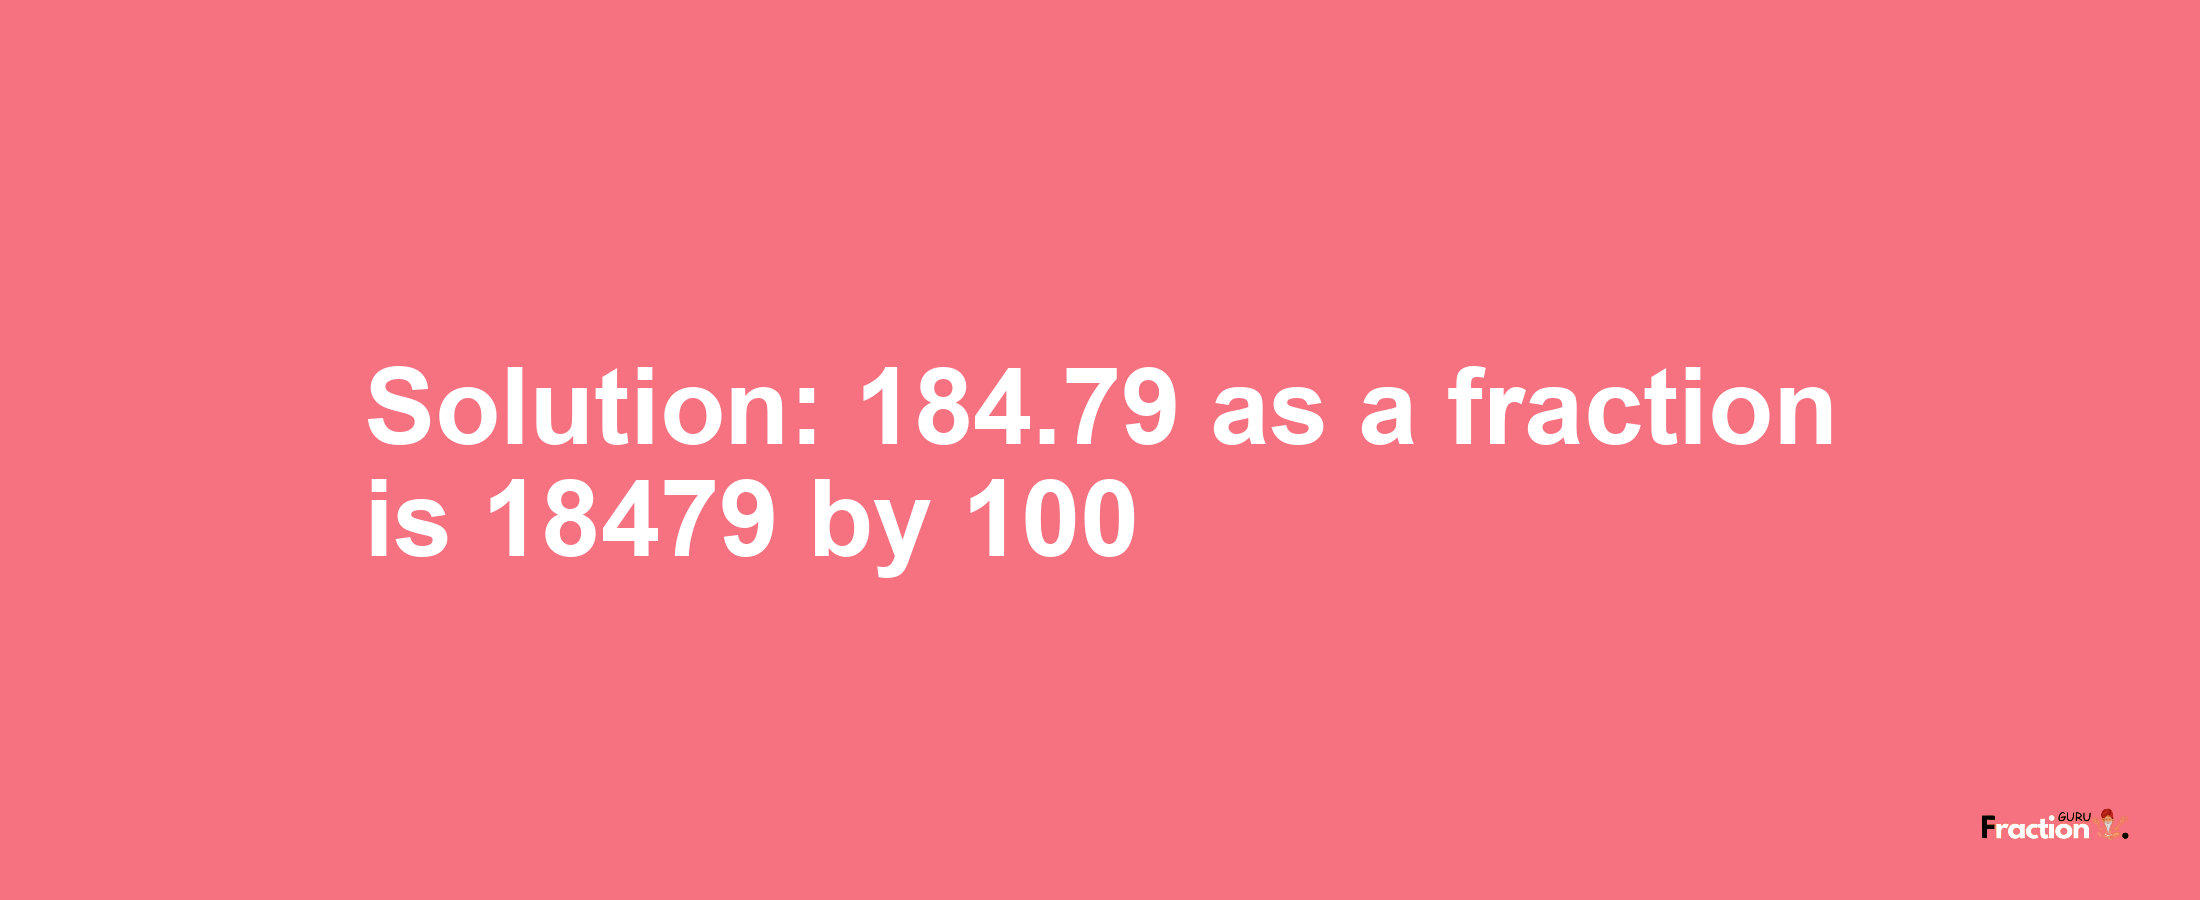 Solution:184.79 as a fraction is 18479/100